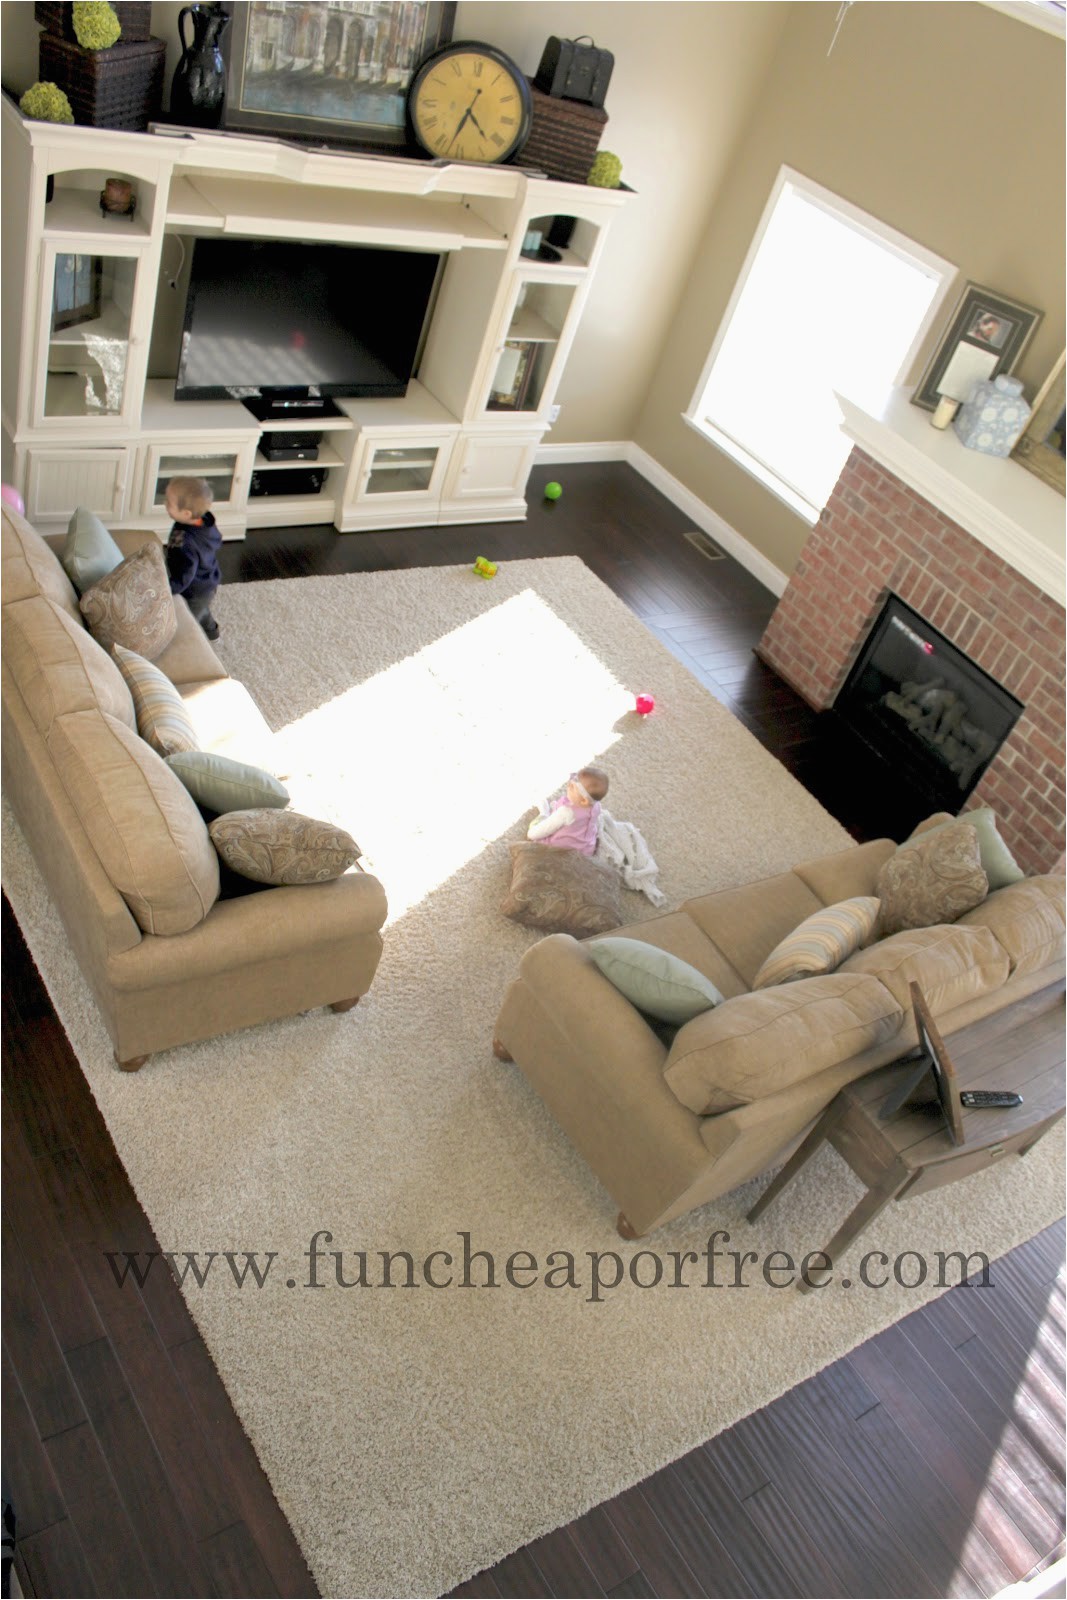 Large area Rugs for Basement How to Make An area Rug Out Of Remnant Carpet Fun Cheap or